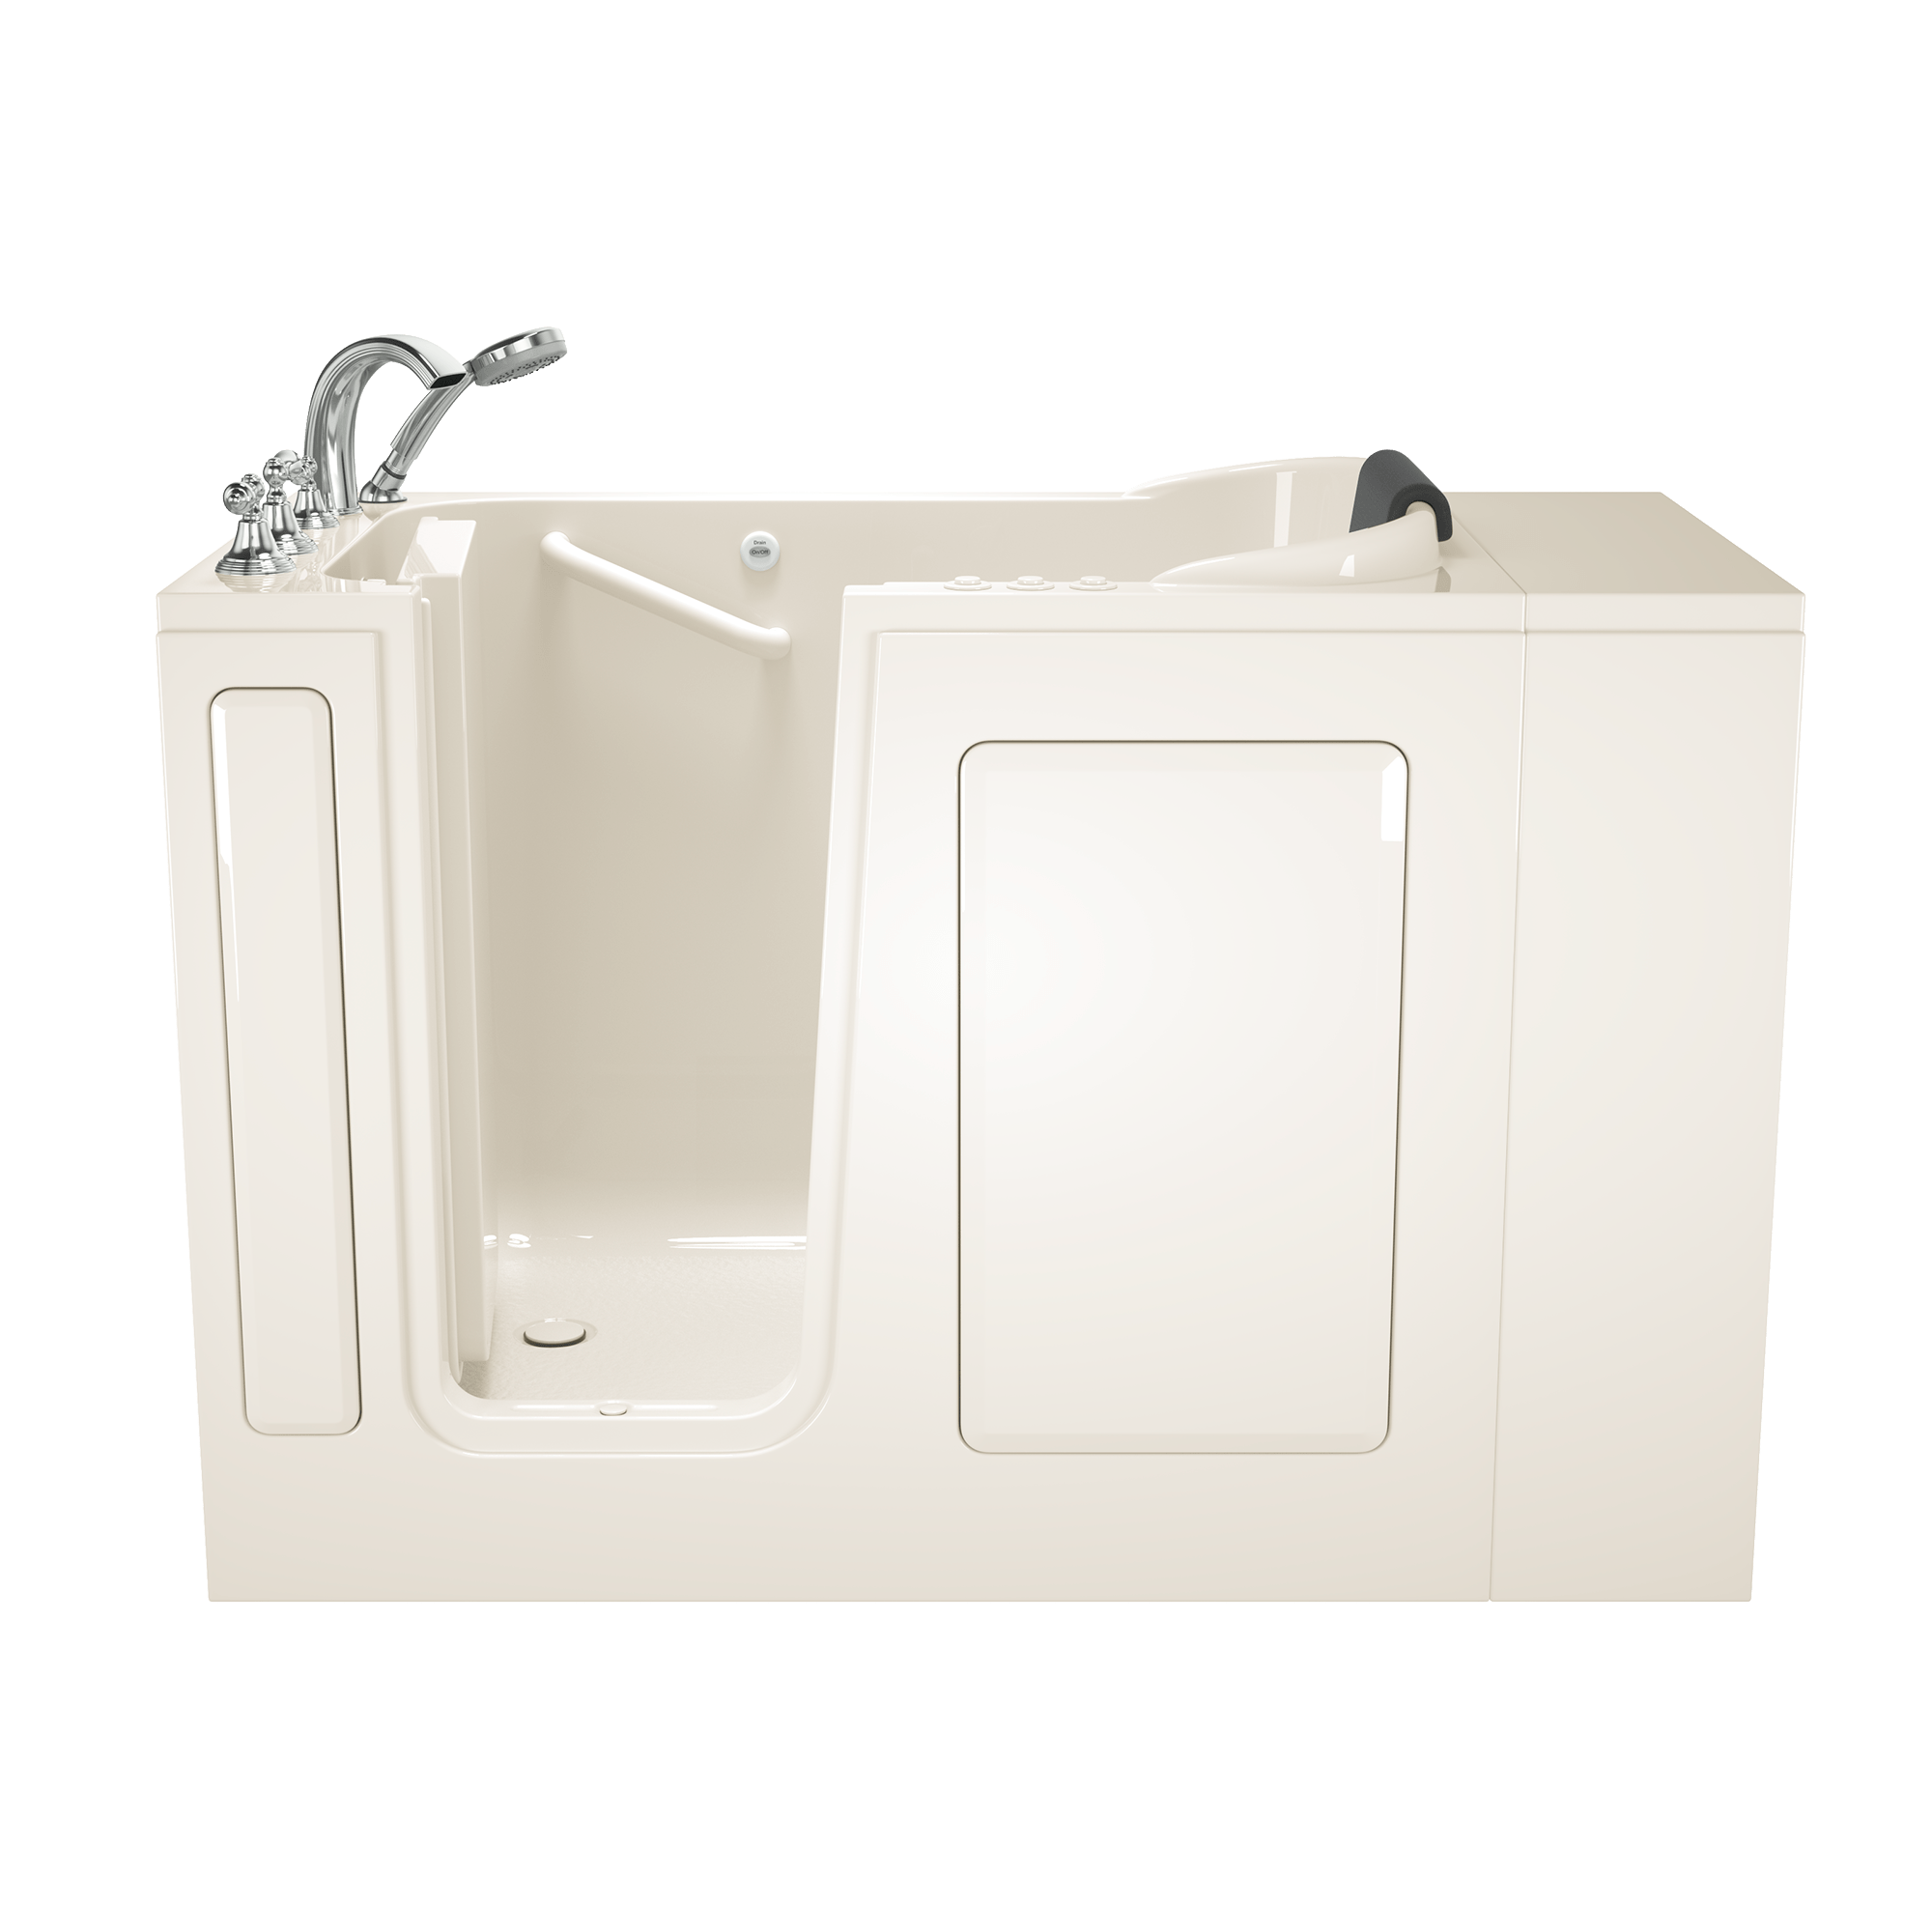 Gelcoat Premium Series 28 x 48-Inch Walk-in Tub With Combination Air Spa and Whirlpool Systems - Left-Hand Drain With Faucet